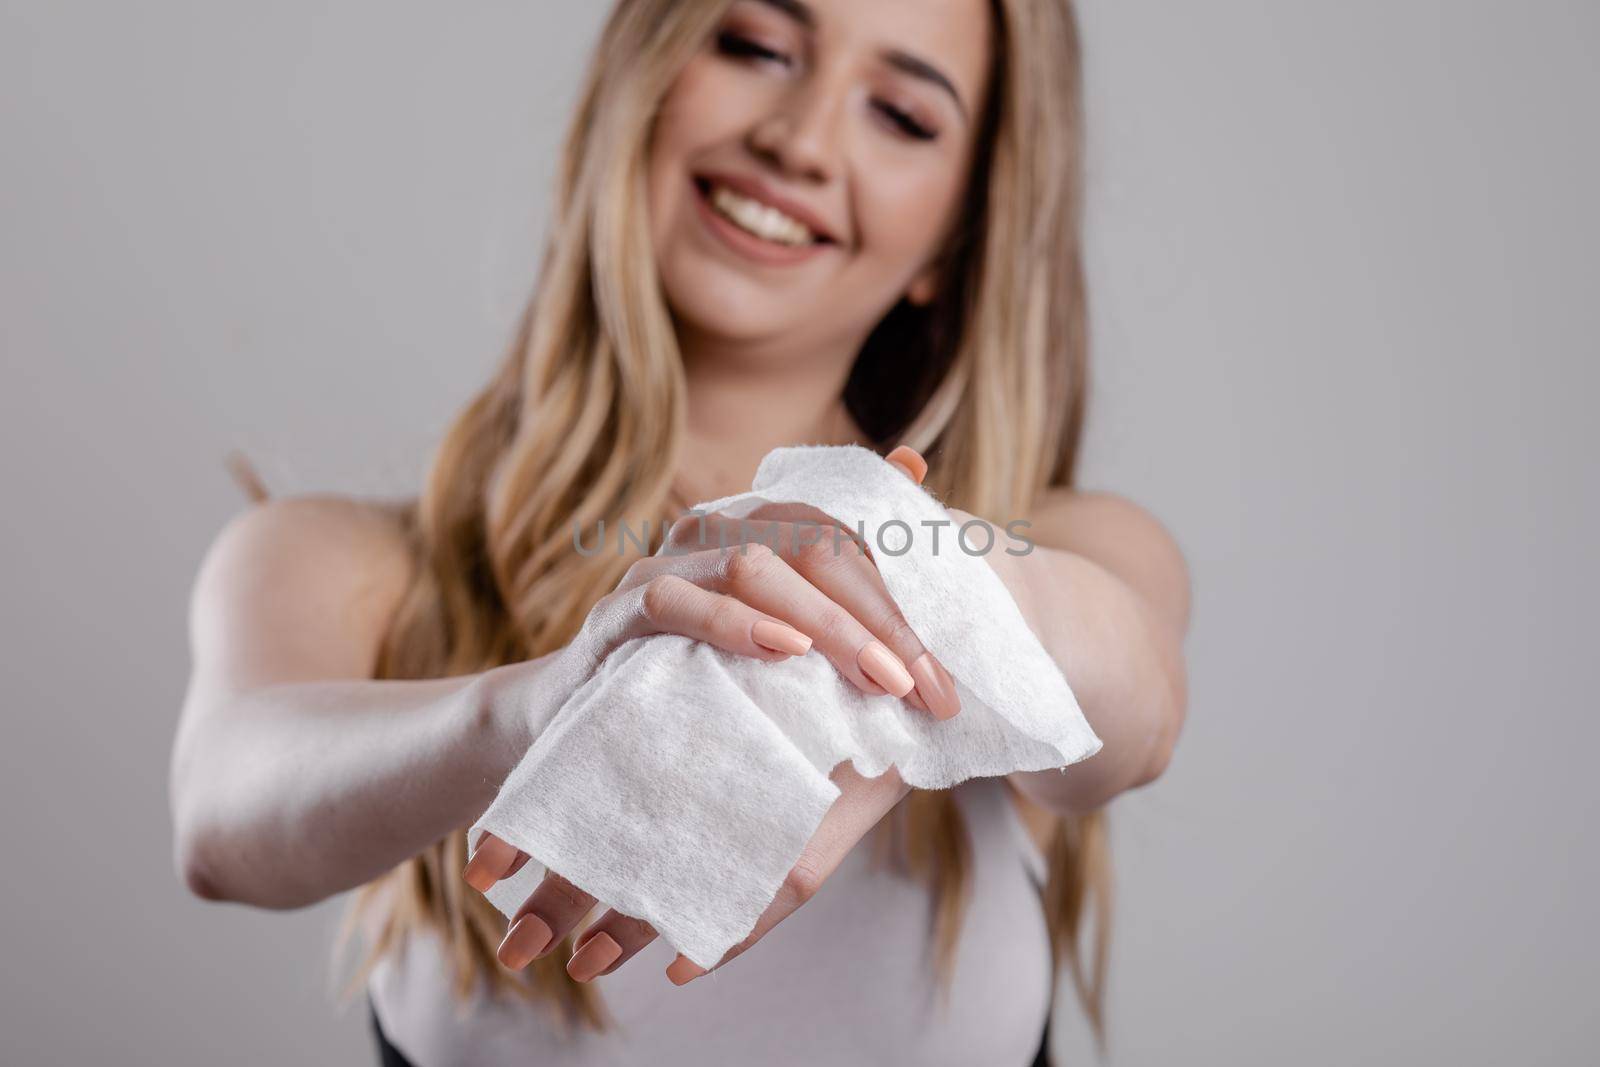 Prevention of infectious diseases, corona19, Cleaning hands with wet wipes